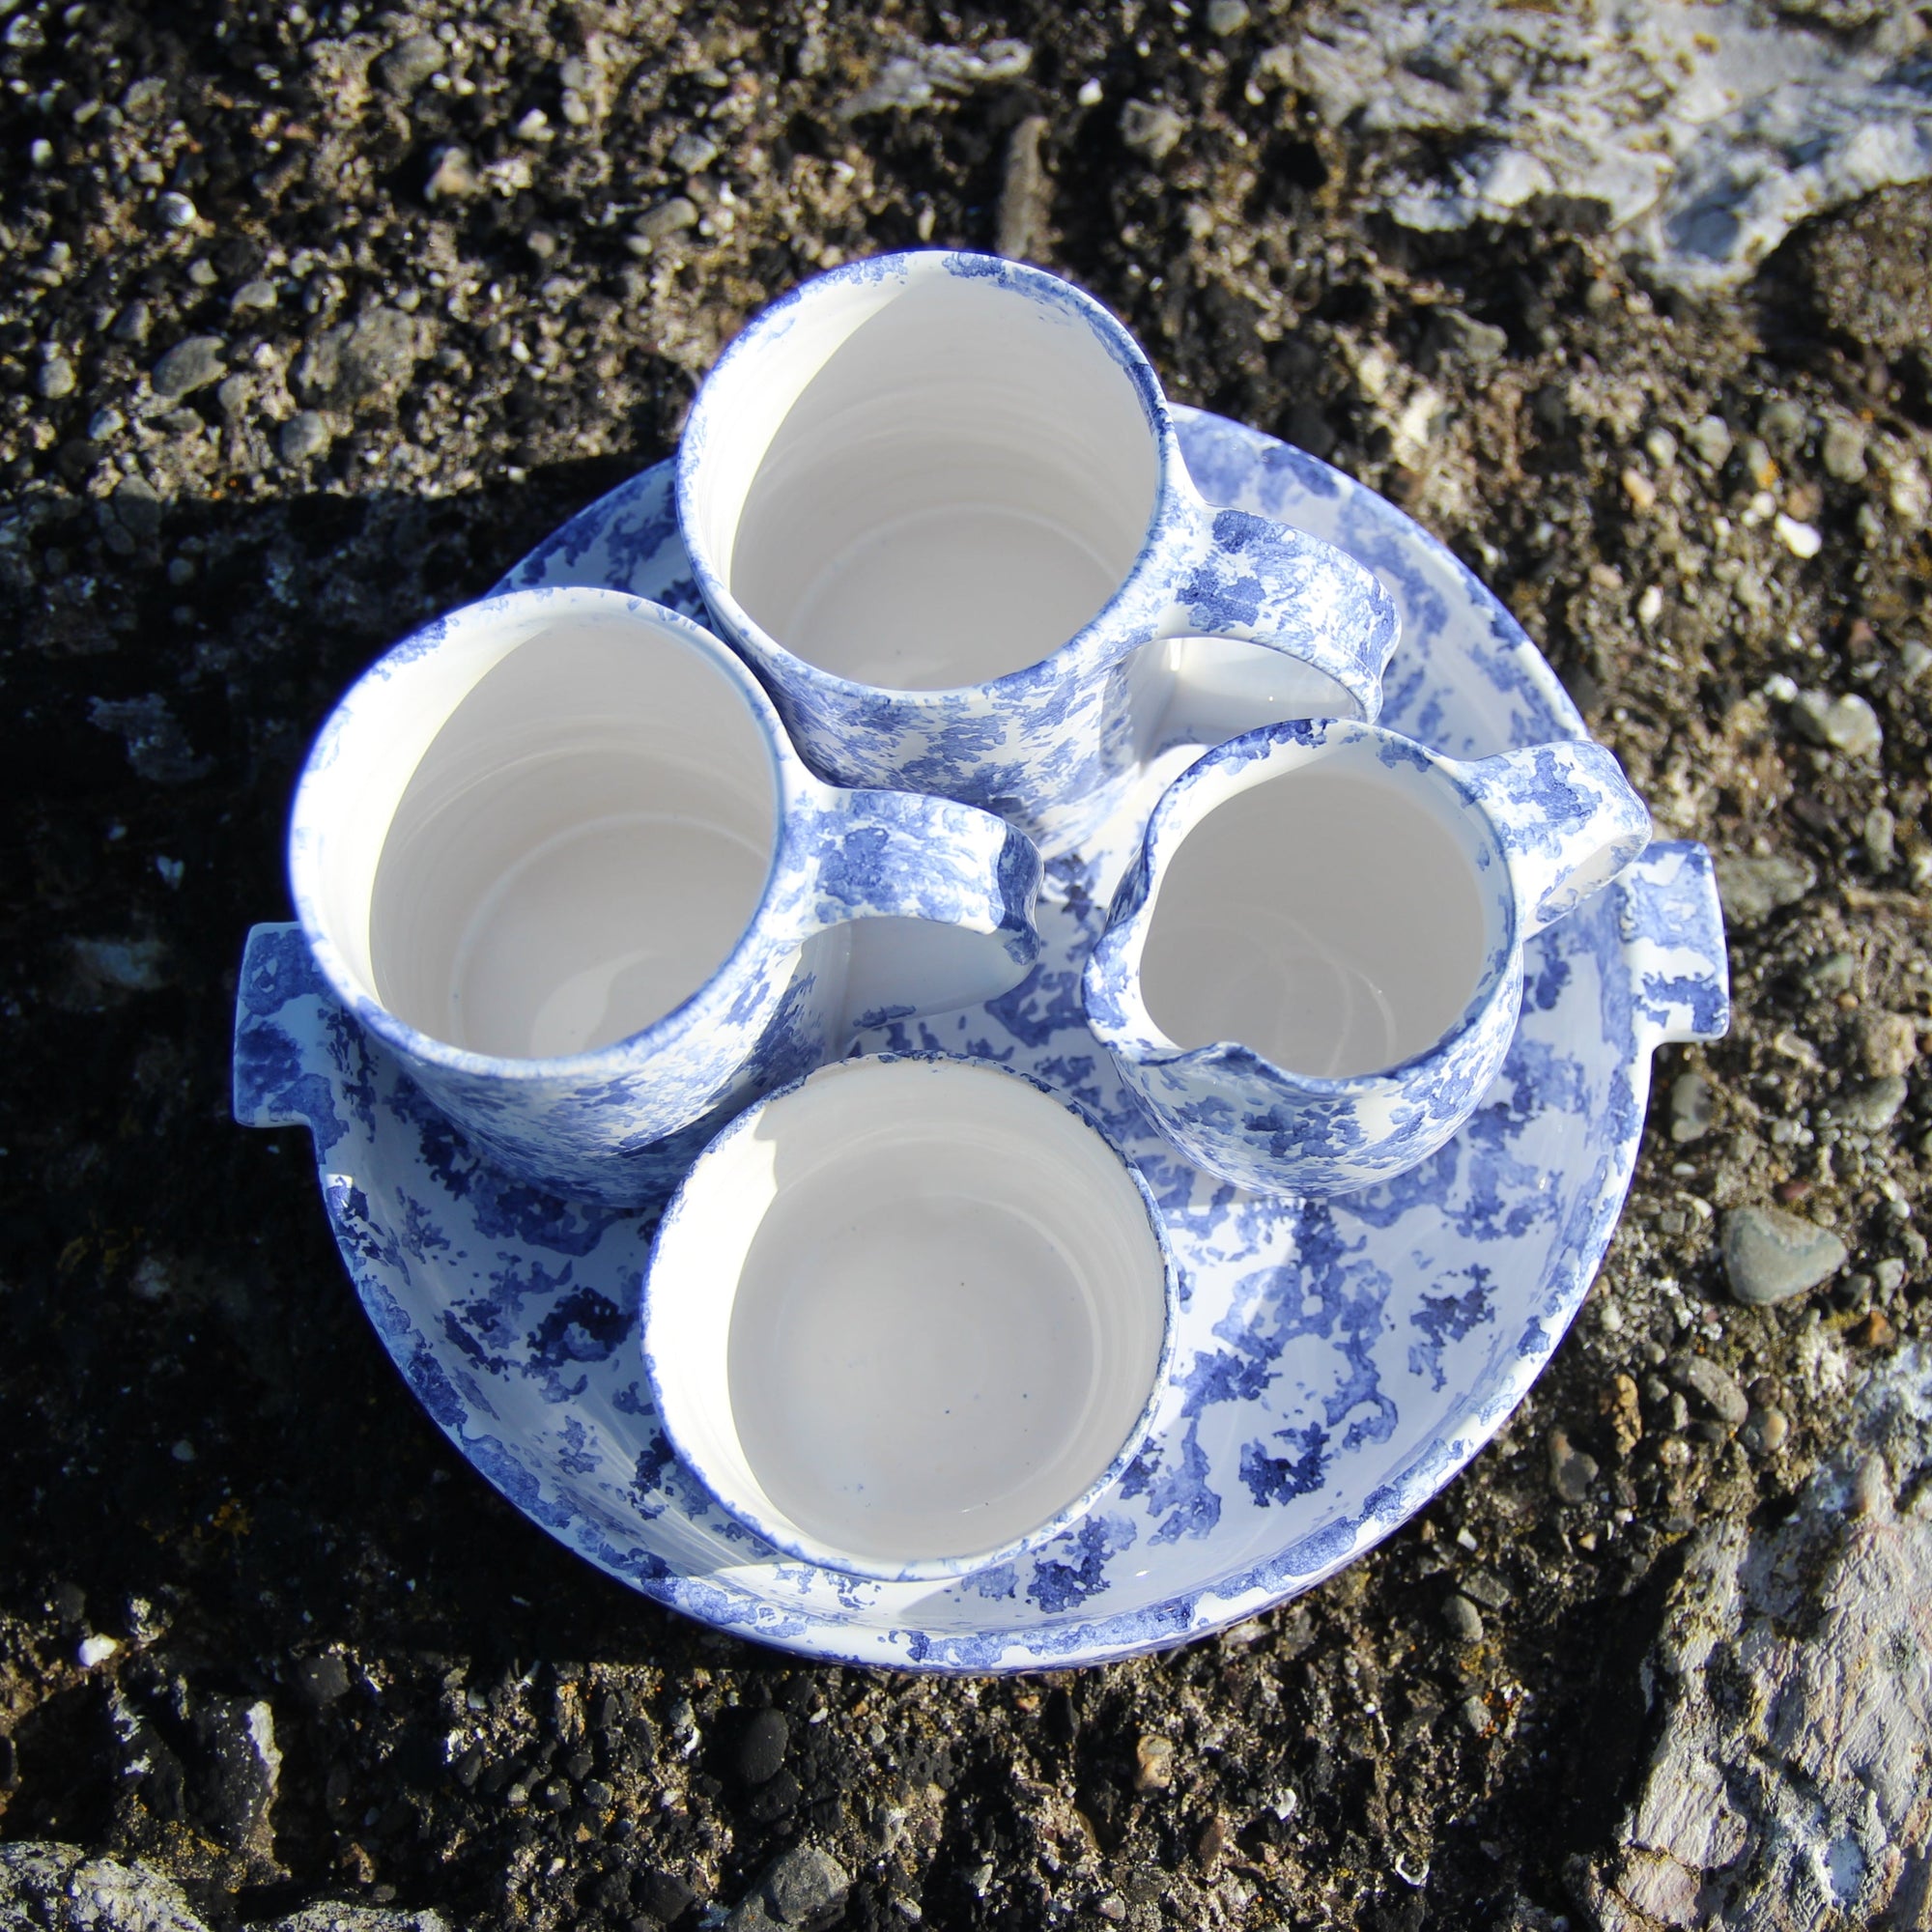 Cuppa for Two, Dark Blue Sponged, Ardmore Pottery